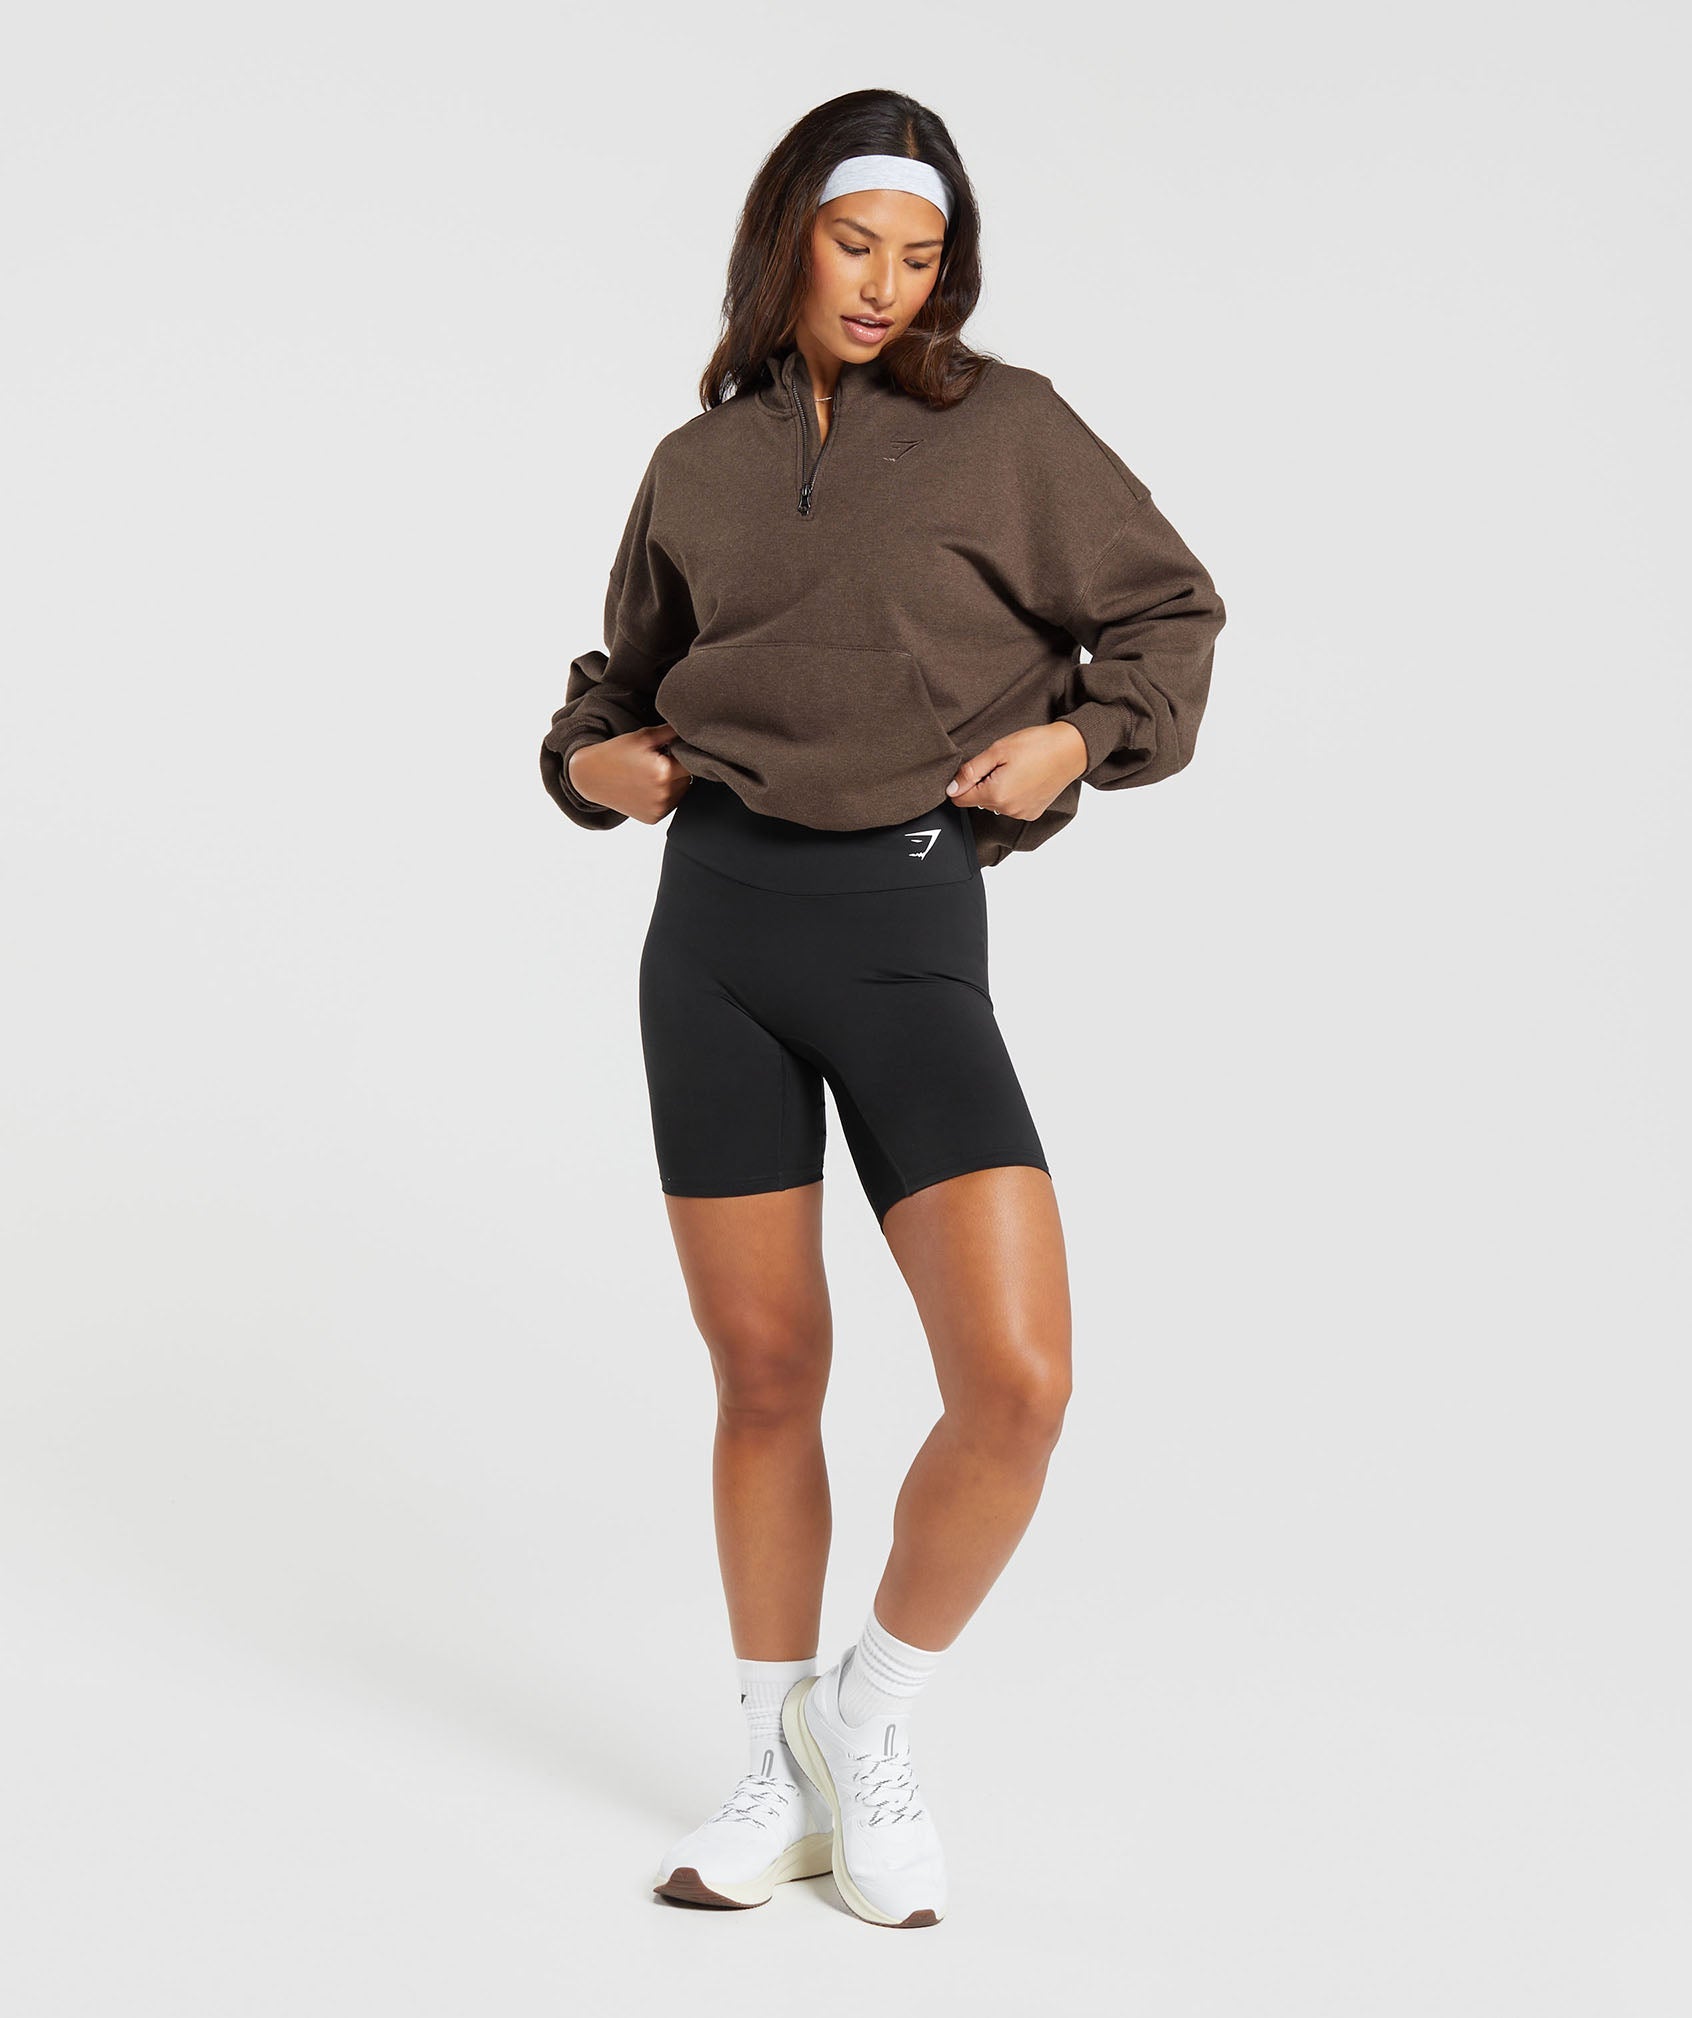 Rest Day Sweats 1/2 Zip Pullover in Cozy Brown Marl - view 4